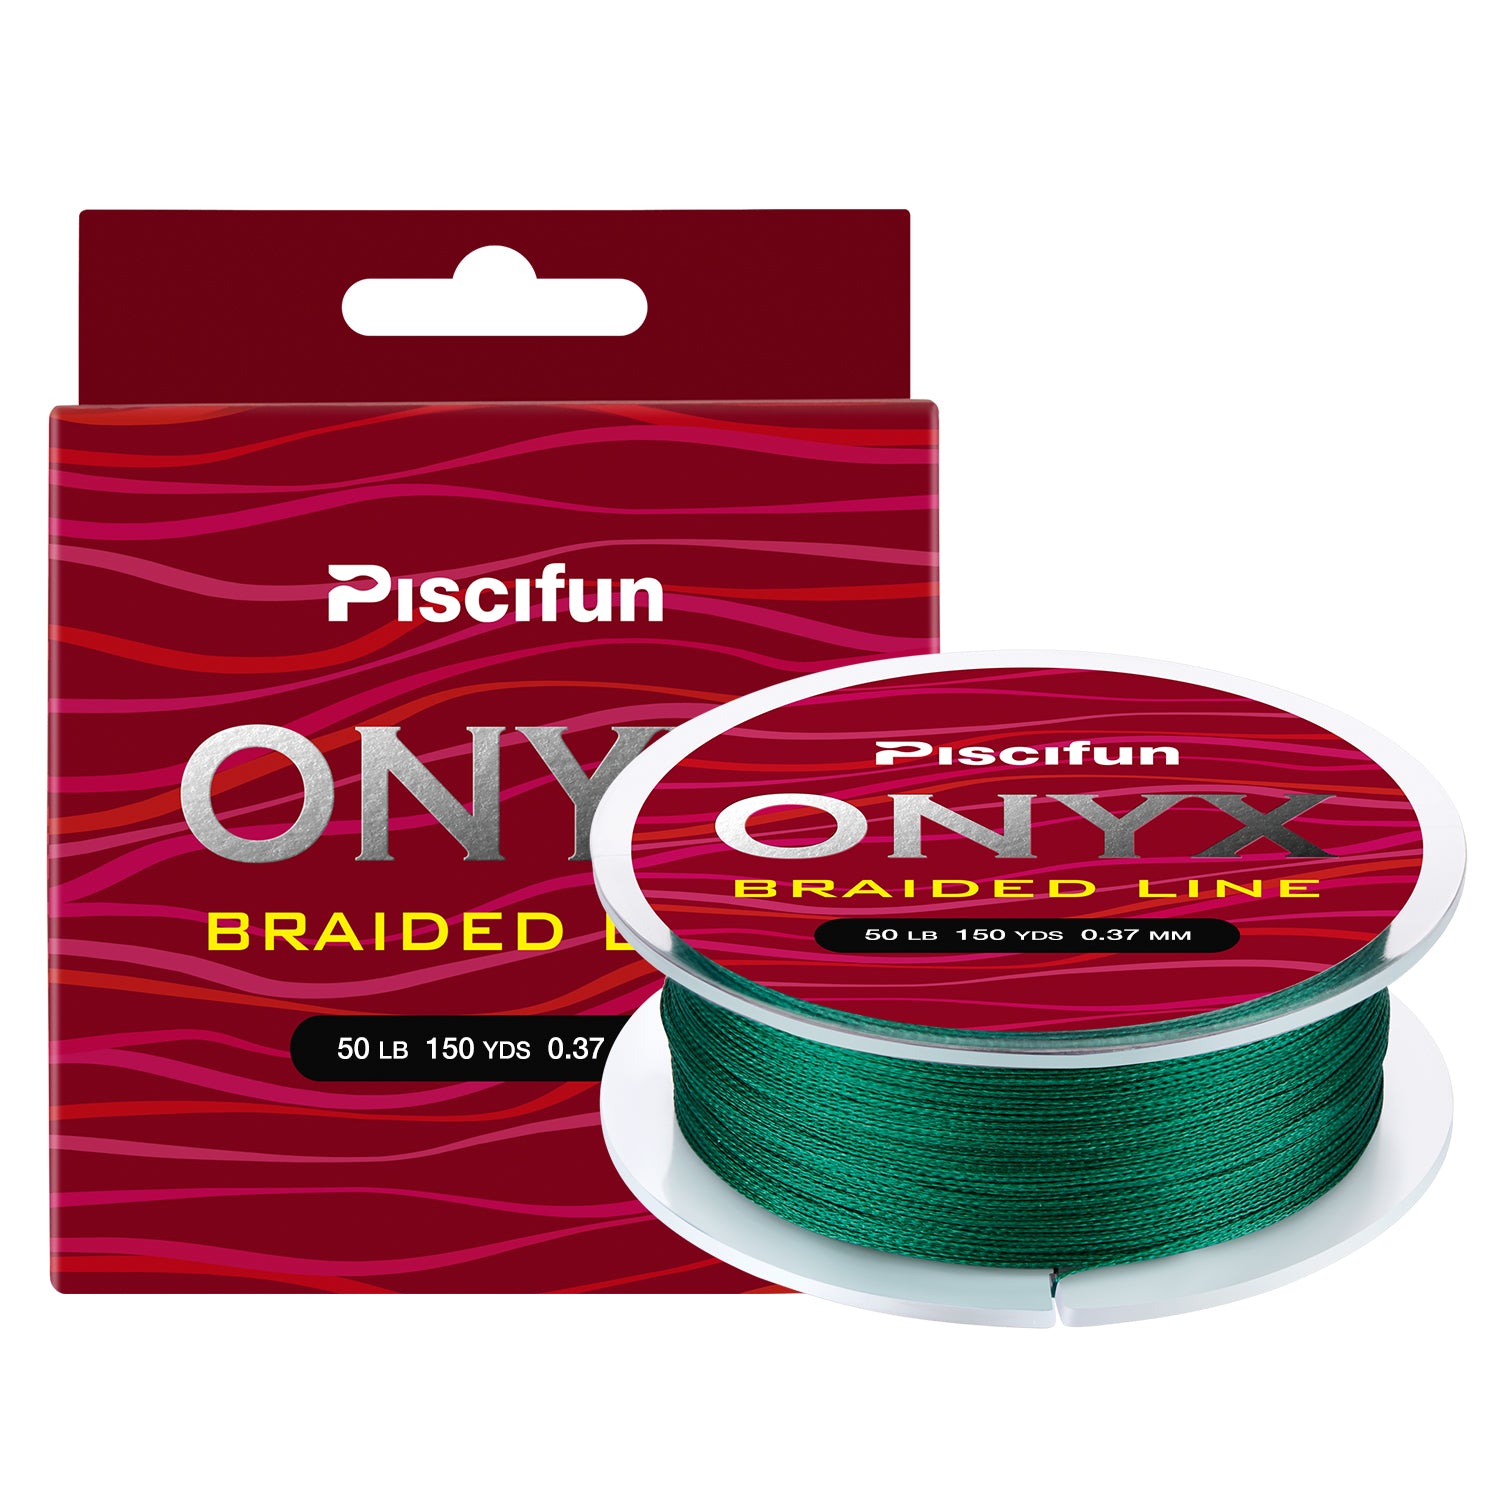 0.10mm braided fishing line, 0.10mm braided fishing line Suppliers and  Manufacturers at